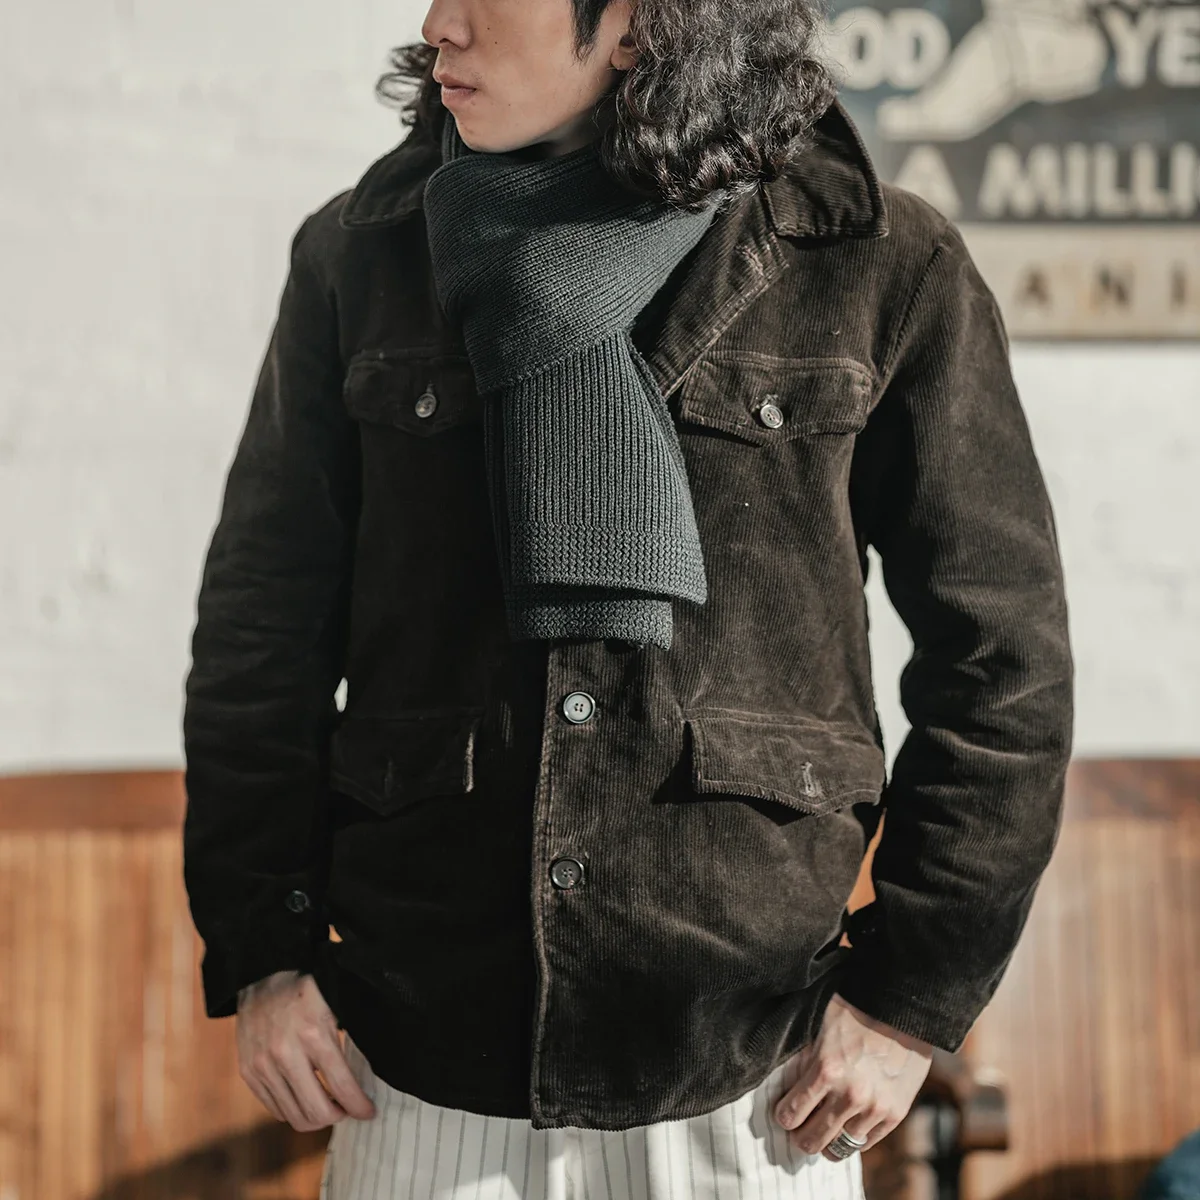 non-stock-naval-wool-blend-scarf-men's-long-warm-scarves-winter-soft-neck-shawl